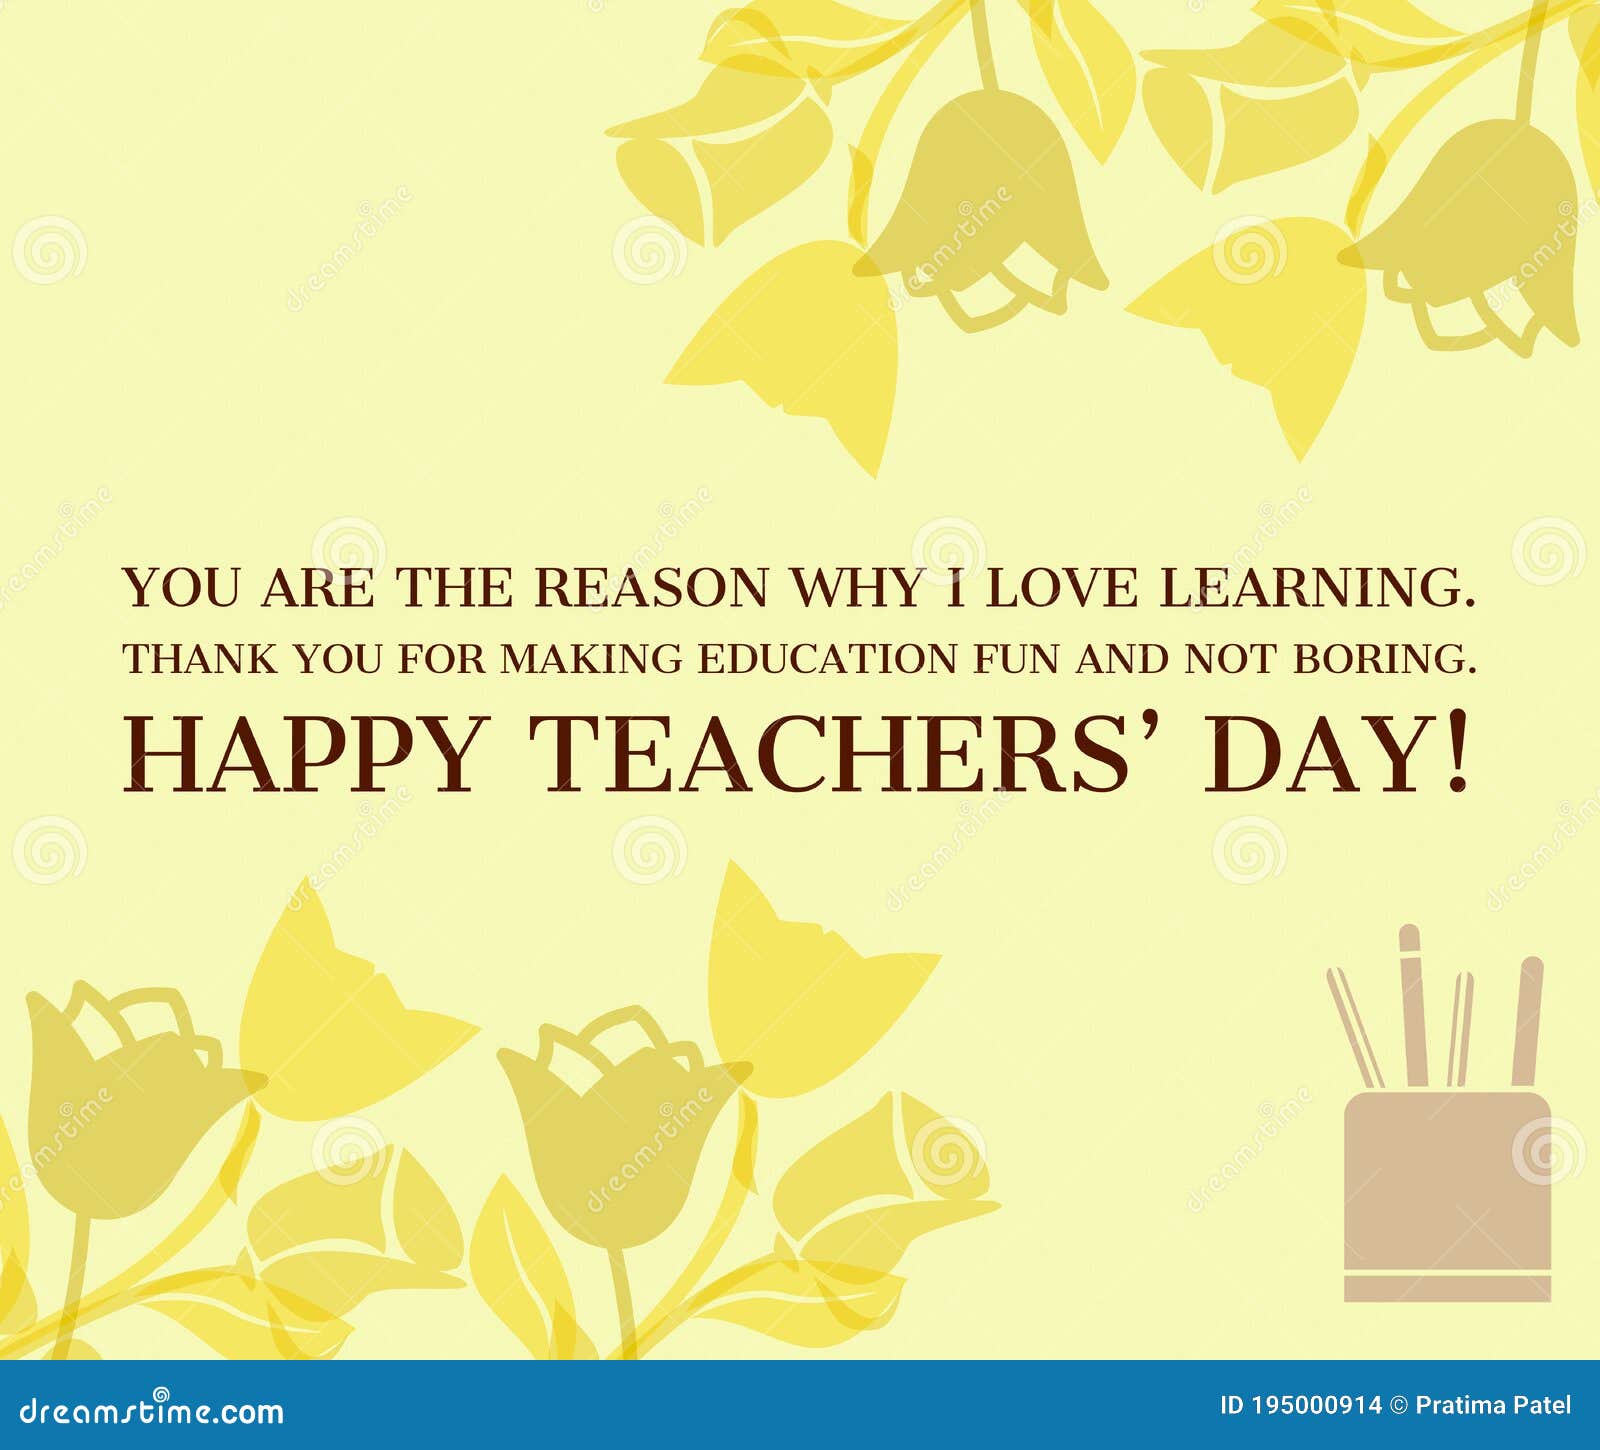 Happy Teachers Day Wishes Greeting Card Abstract Background with Colorful  Floral Pattern, Graphic Design Illustration Wallpaper Stock Illustration -  Illustration of advertising, poster: 195000914